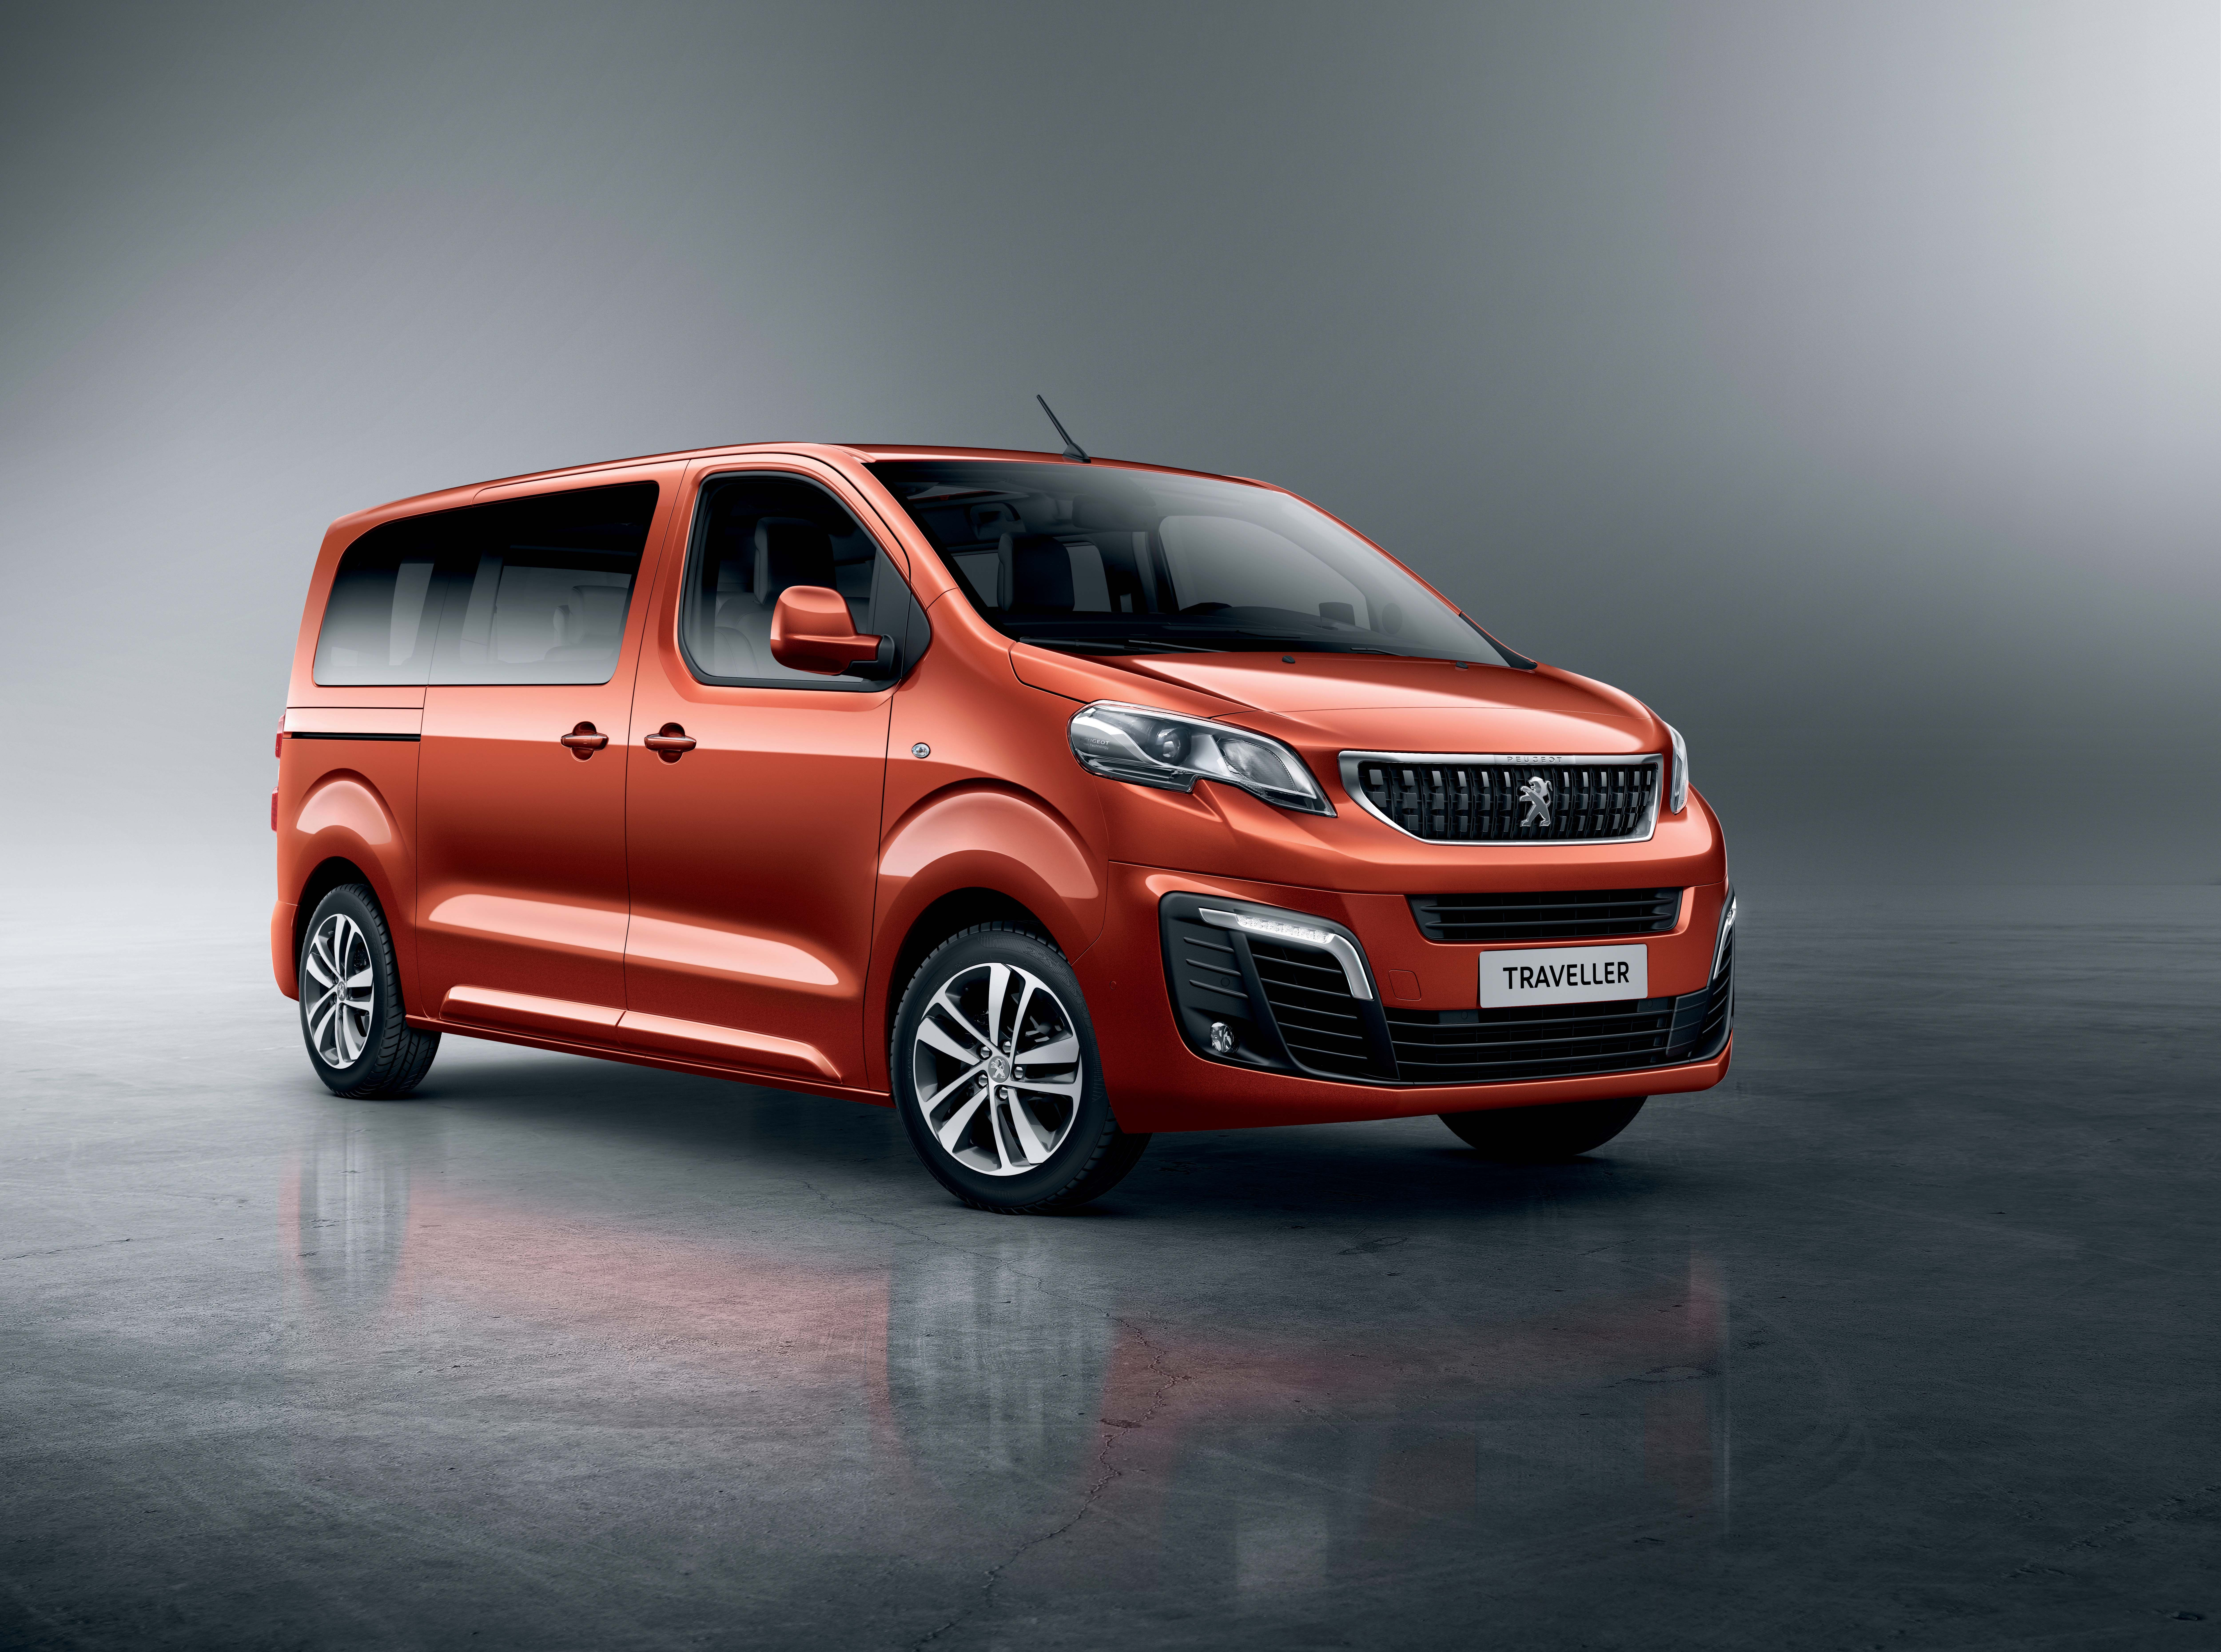 Plys dukke rysten Stramme Peugeot Lineup of French Cars and SUVs – Returning to the U.S.